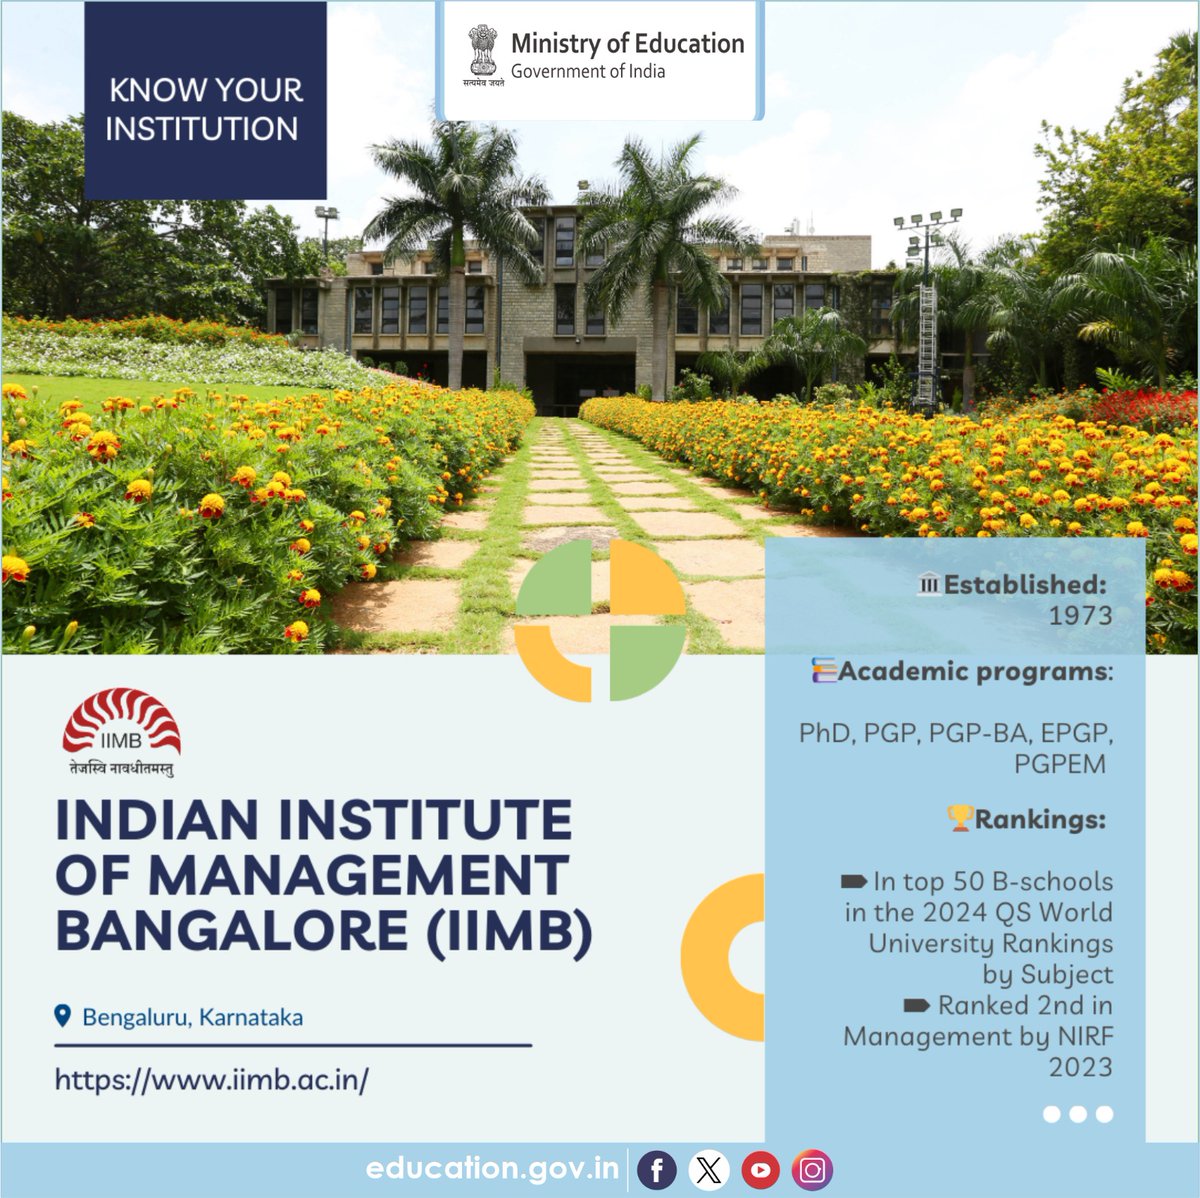 Know about the HEIs of India! Indian Institute of Management Bangalore (IIMB) is one of India's premier management schools, established in 1973. It is also recognised as an Institute of National Importance. The institution’s logo carries a proclamation in Sanskrit, तेजस्वि